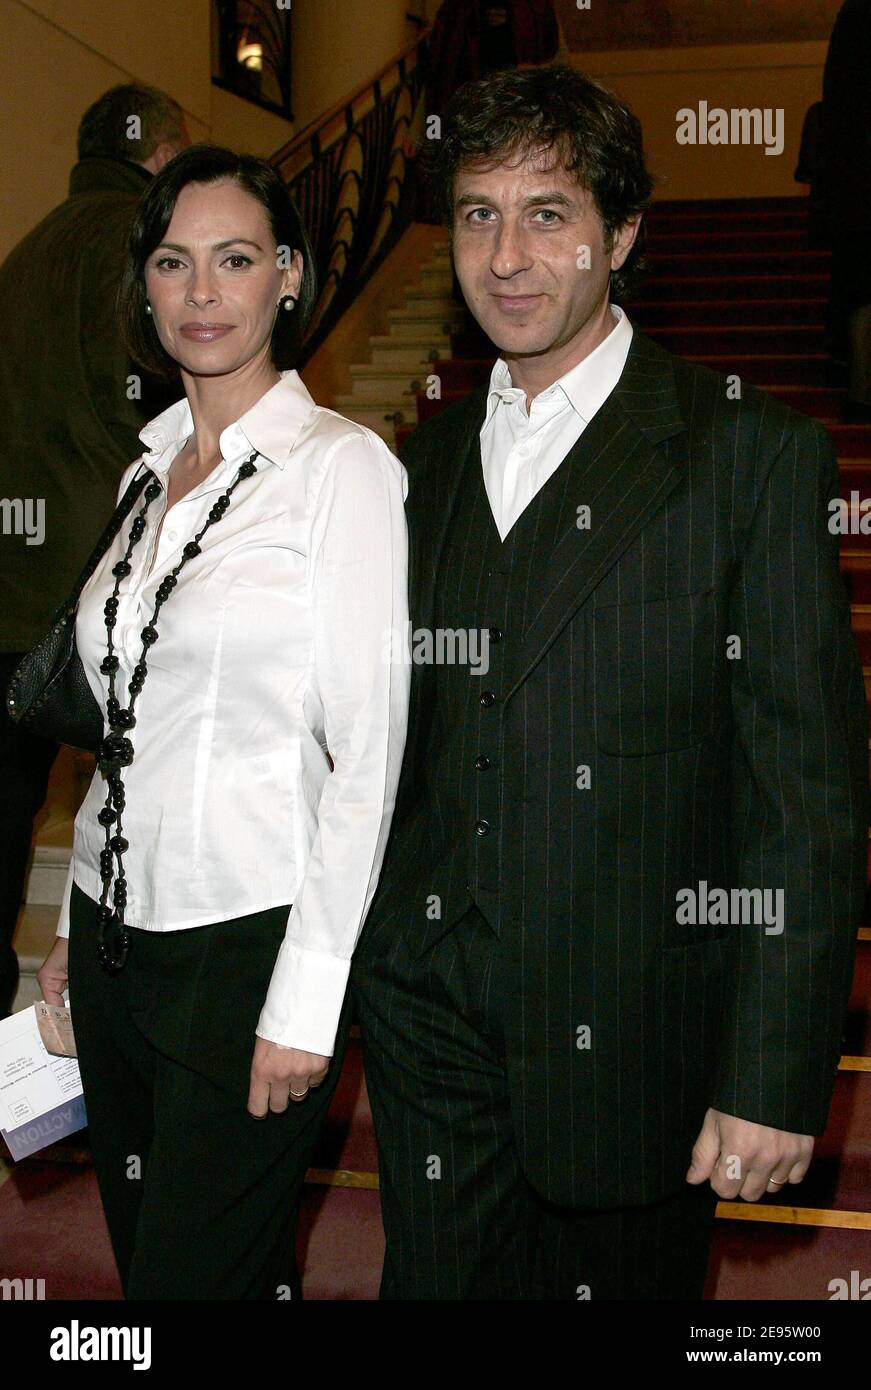 French actress Mathilda May and her husband Philippe Kelly attend the 11th Gala 'Musique Contre l'Oubli' for the benefit of Amnesty International at the Theatre des Champs Elysees in Paris on February 22, 2006. Photo by Laurent Zabulon/ABACAPRESS.COM. Stock Photo